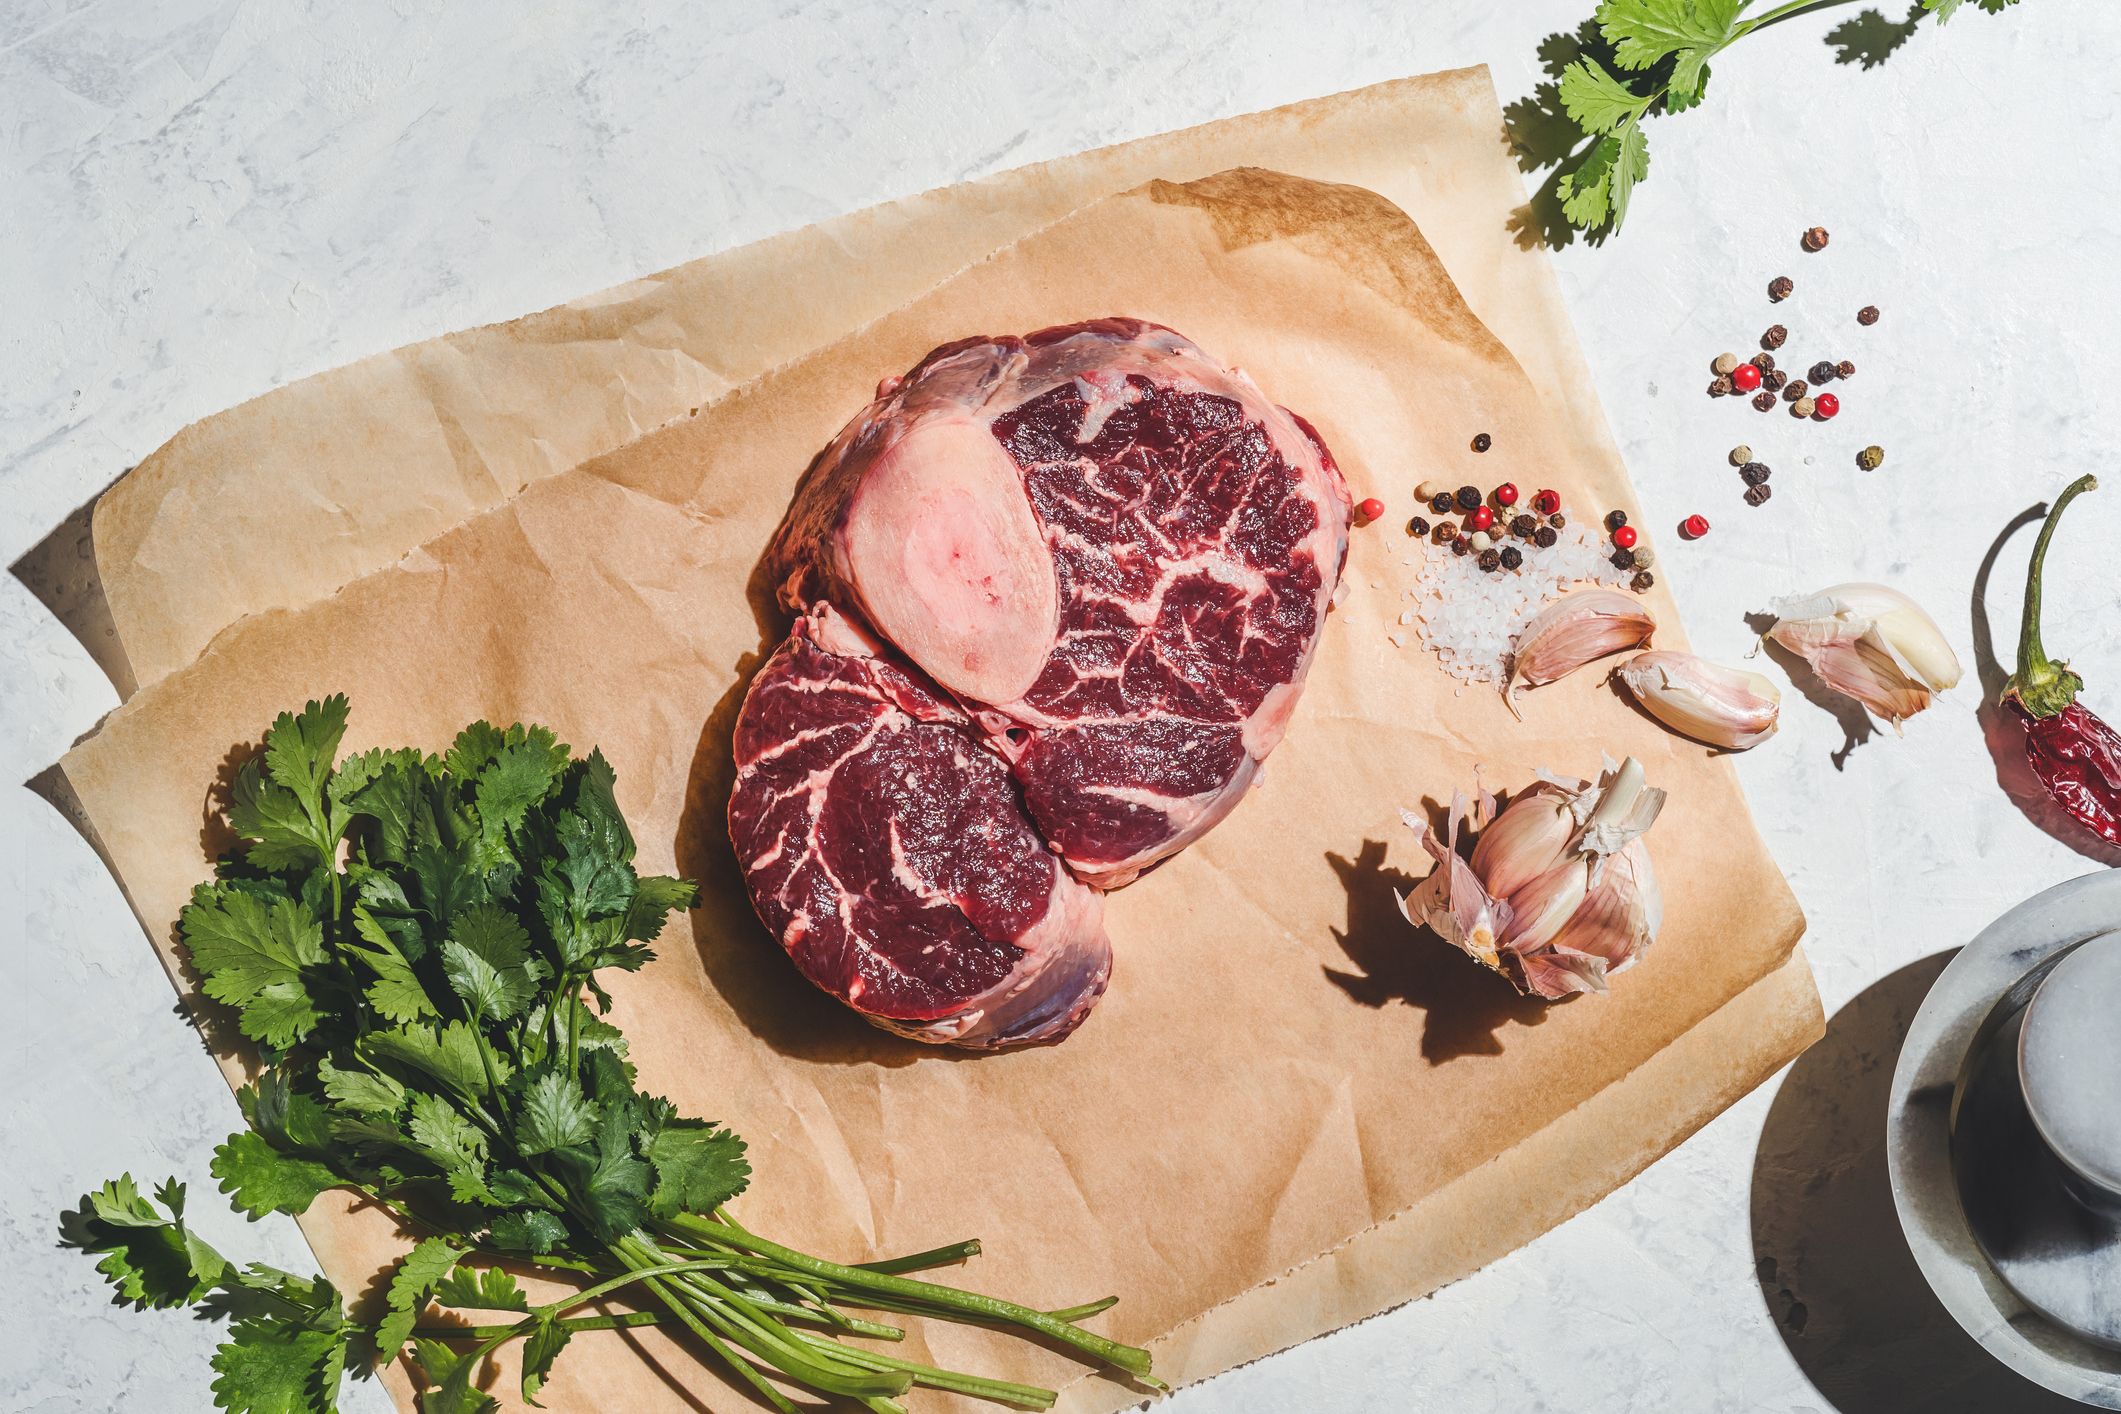 Good Chop Review: Value, quality and variety in meat delivery